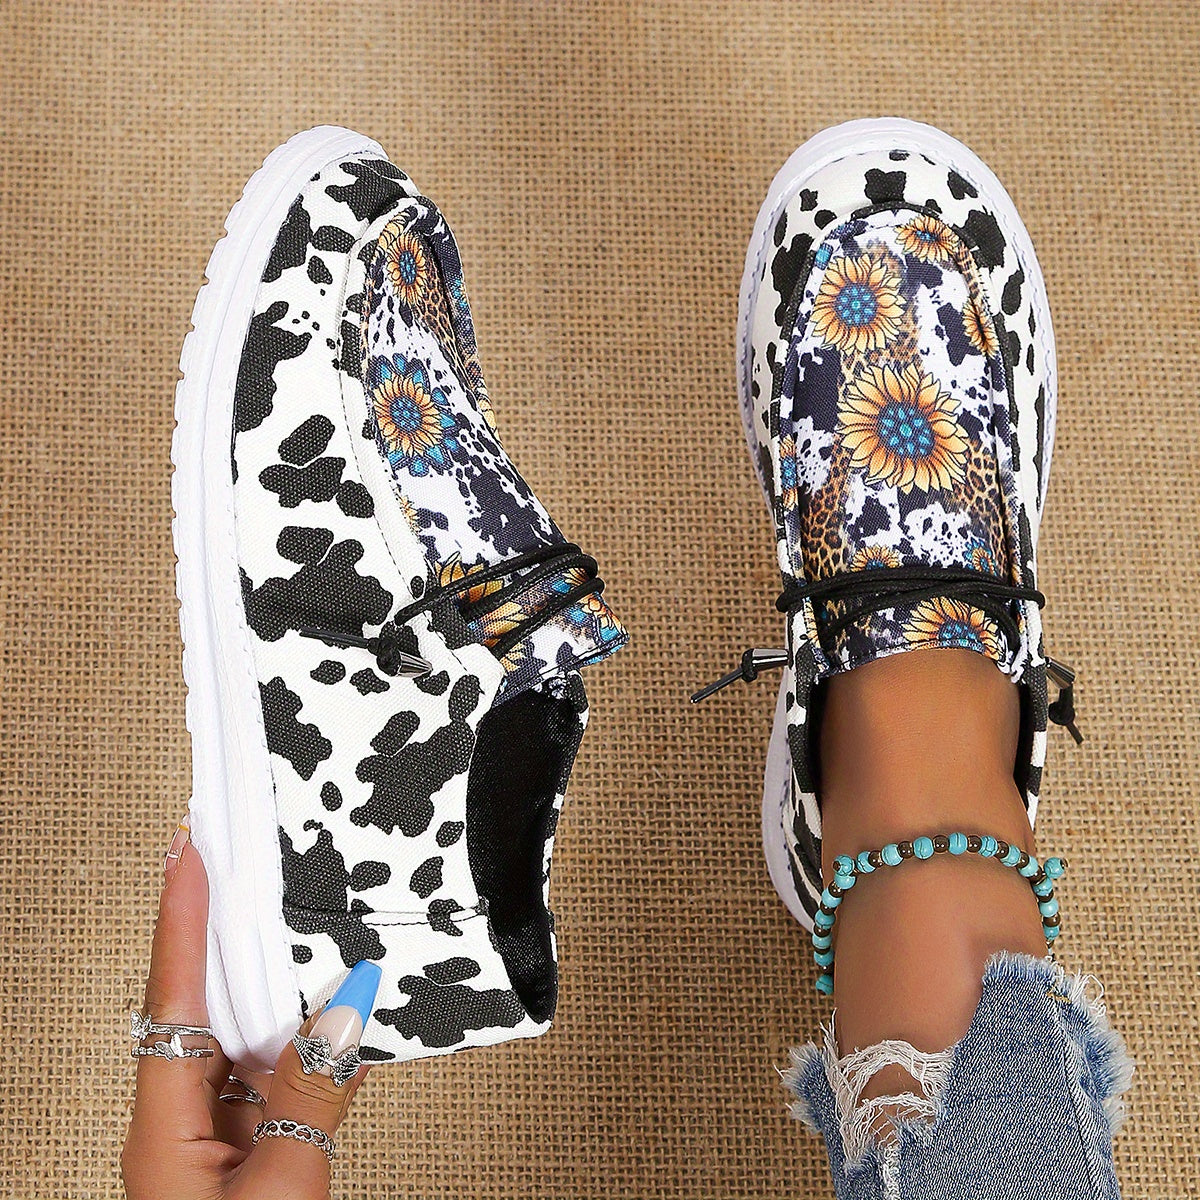 Sunflower Print Canvas Shoes, Lightweight Lace Up Shoes